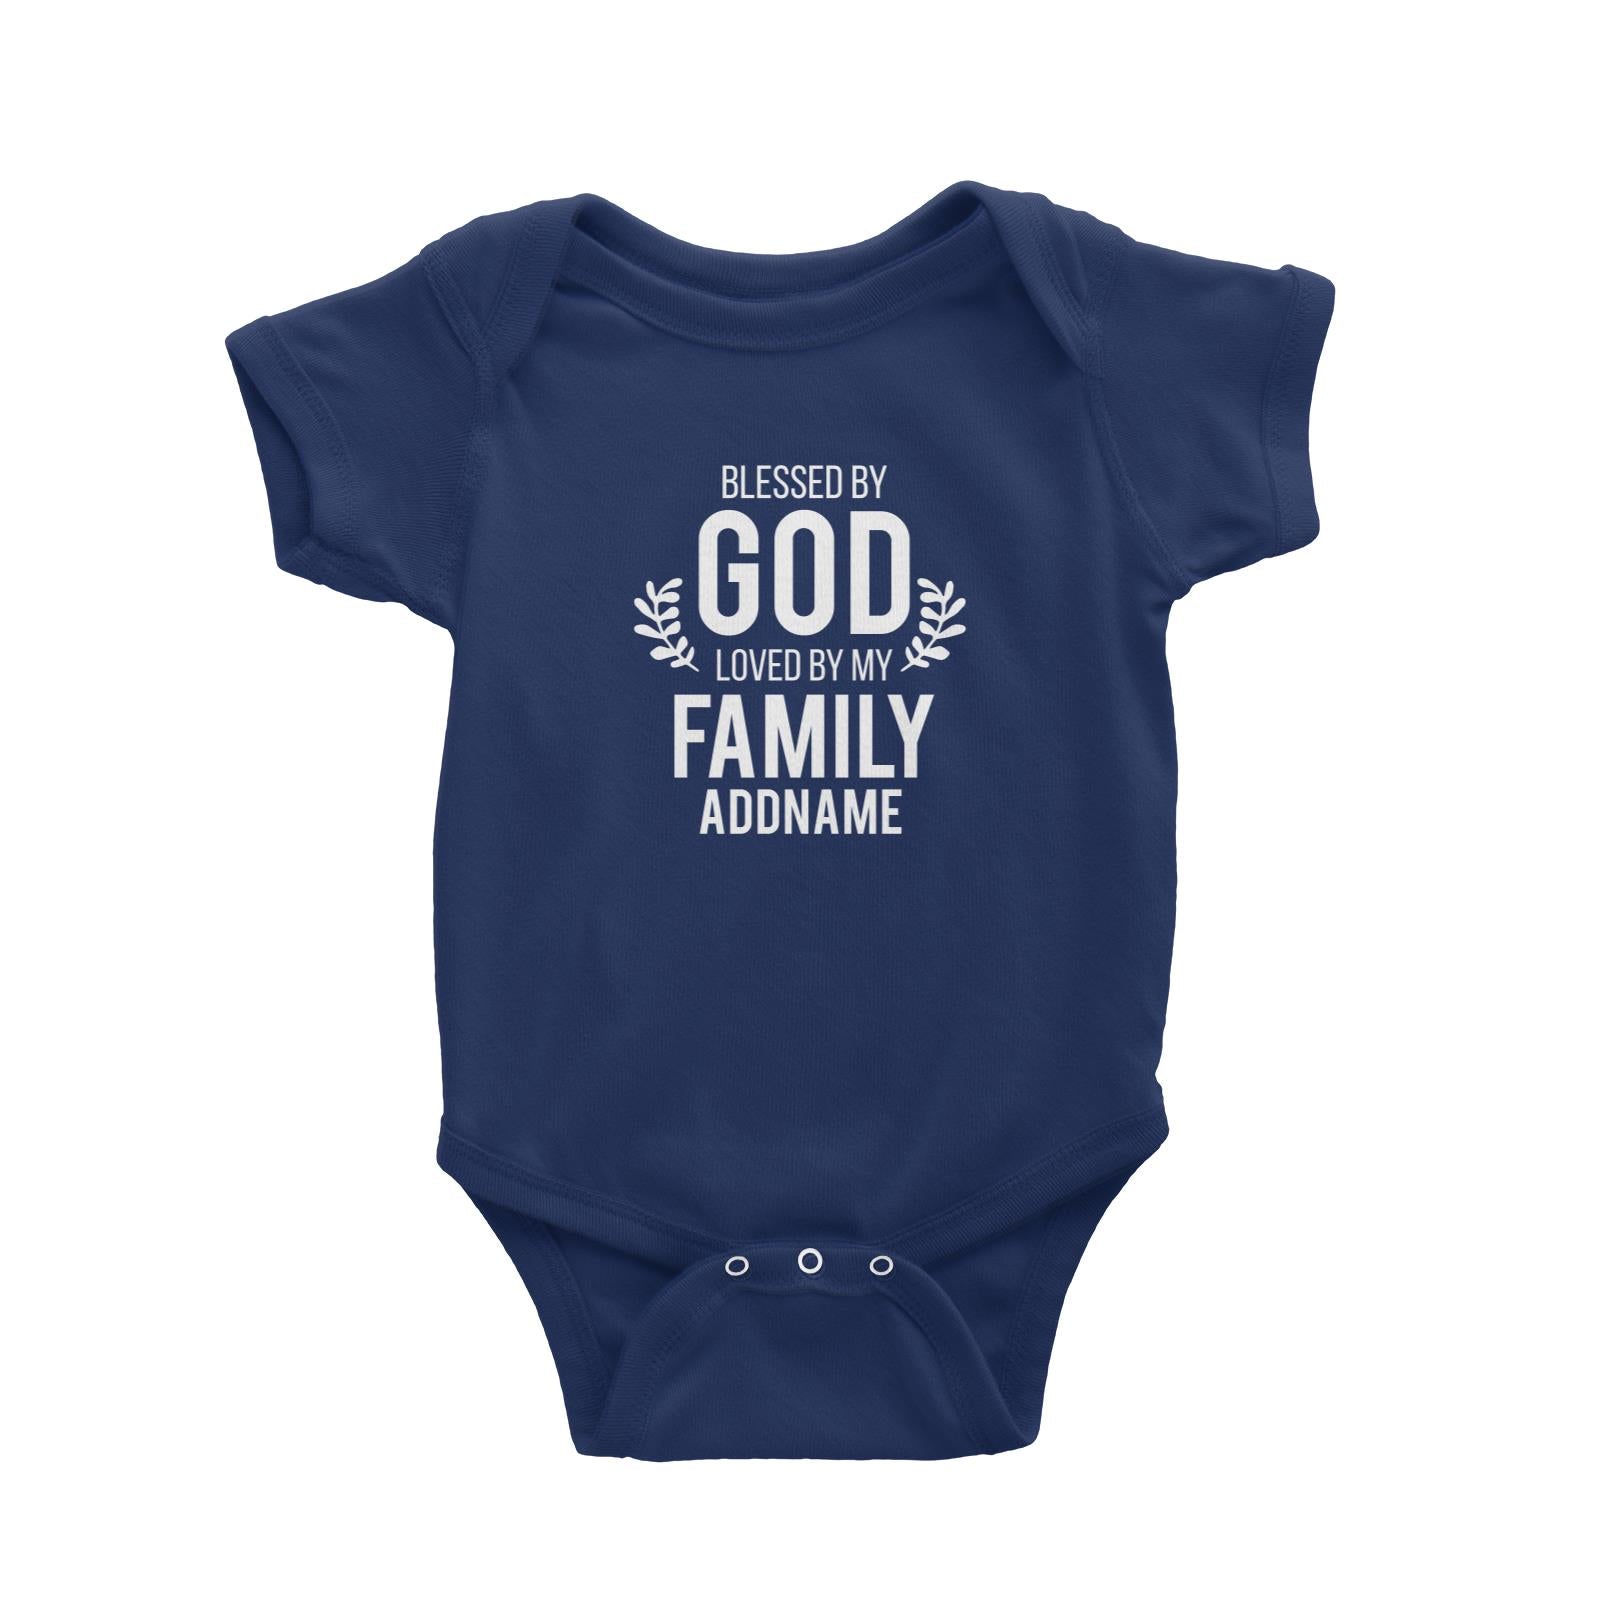 Christian Series Blessed By God Love By My Family Addname Baby Romper